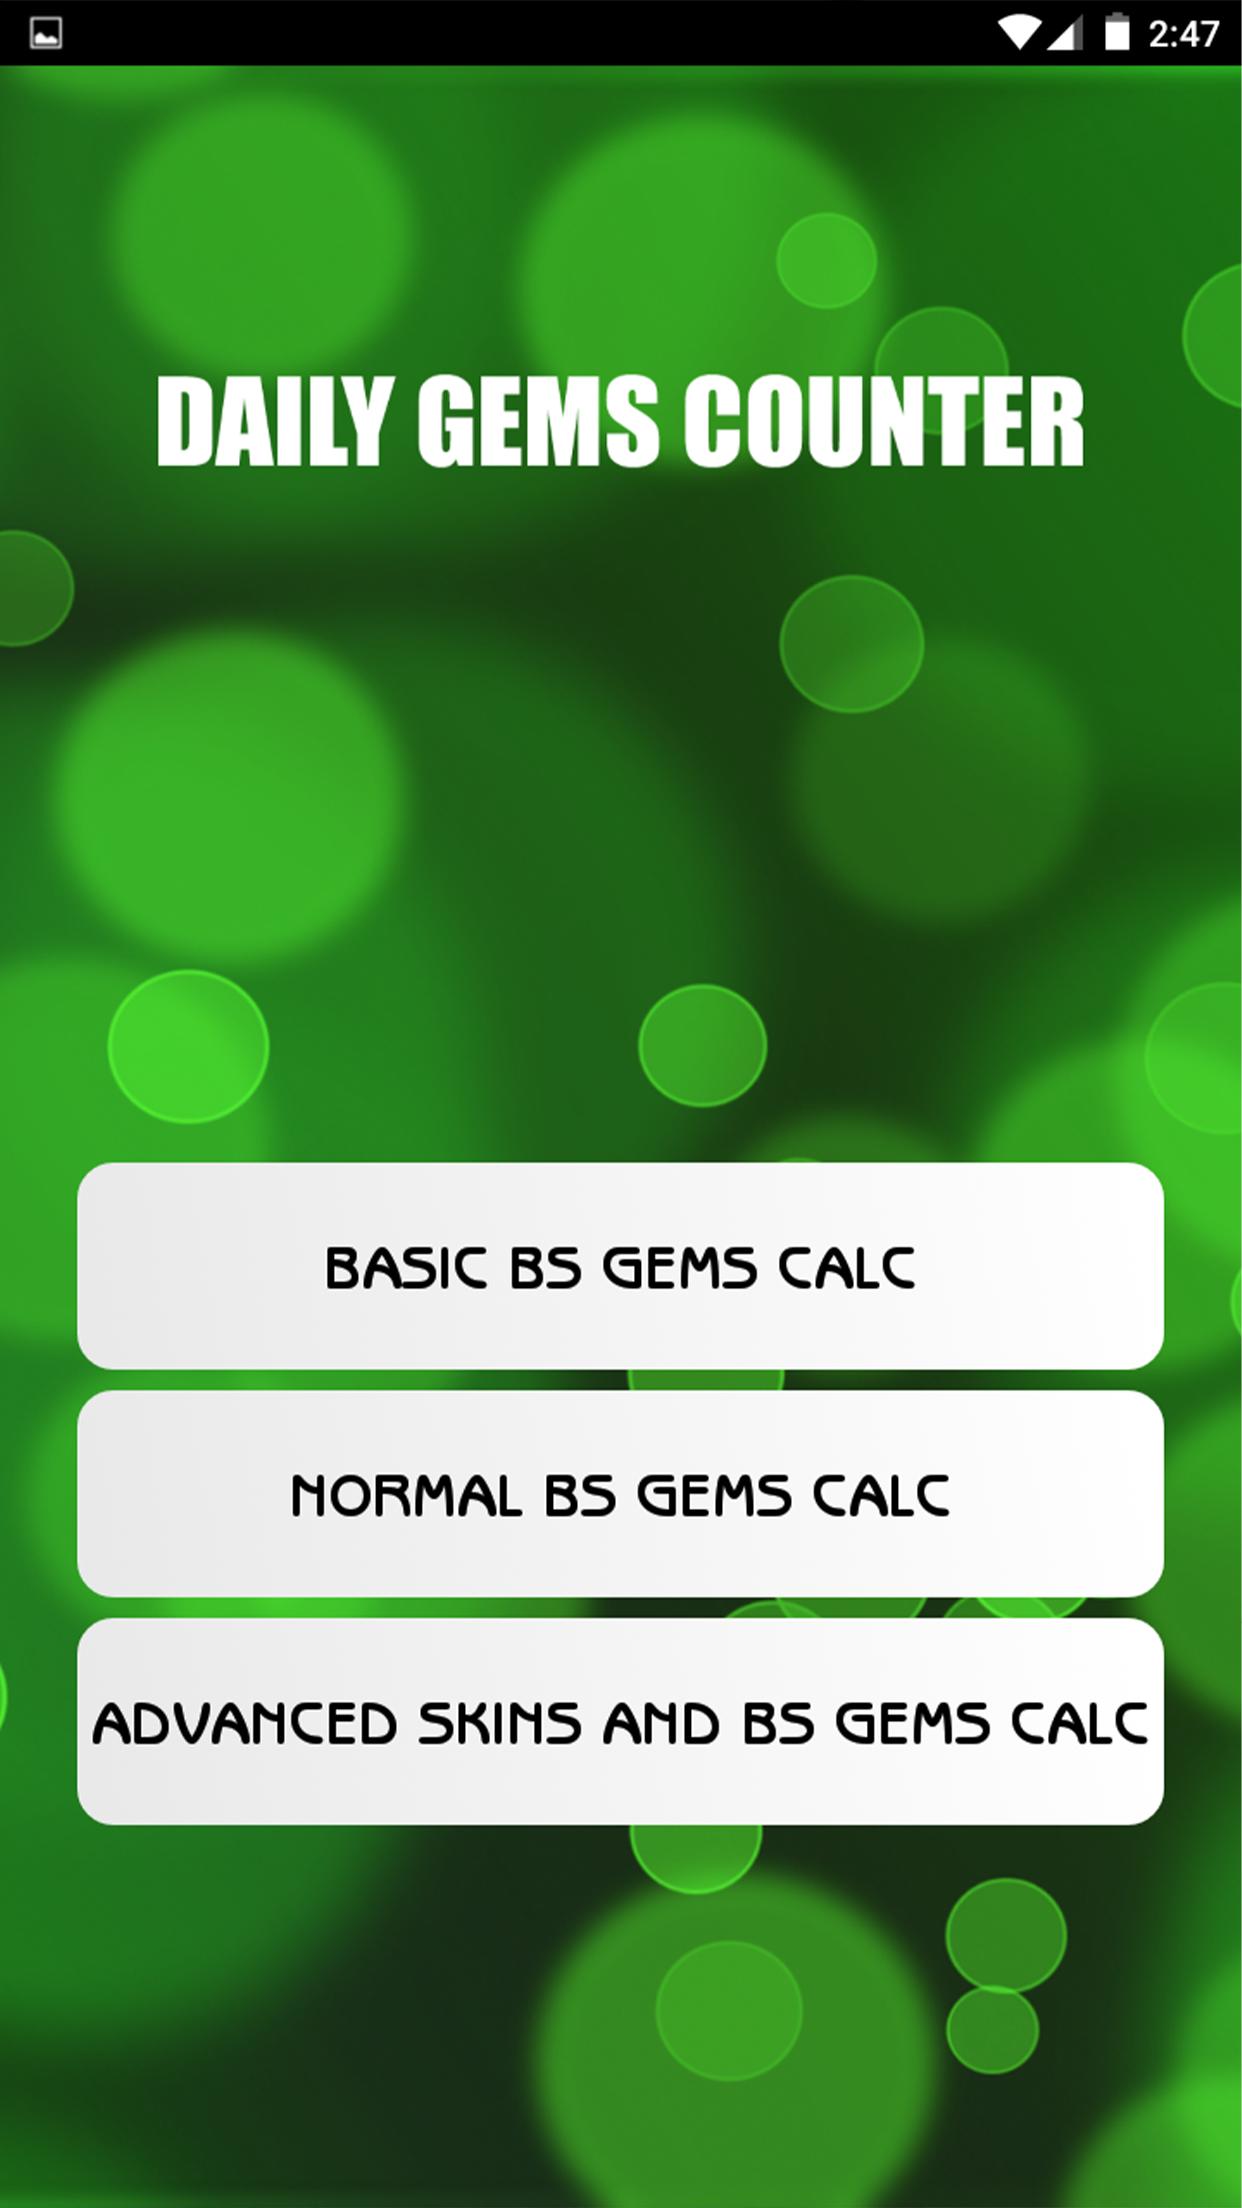 Free Gems Calc For Brawl Star 2020 For Android Apk Download - brawl stars pantalla verde